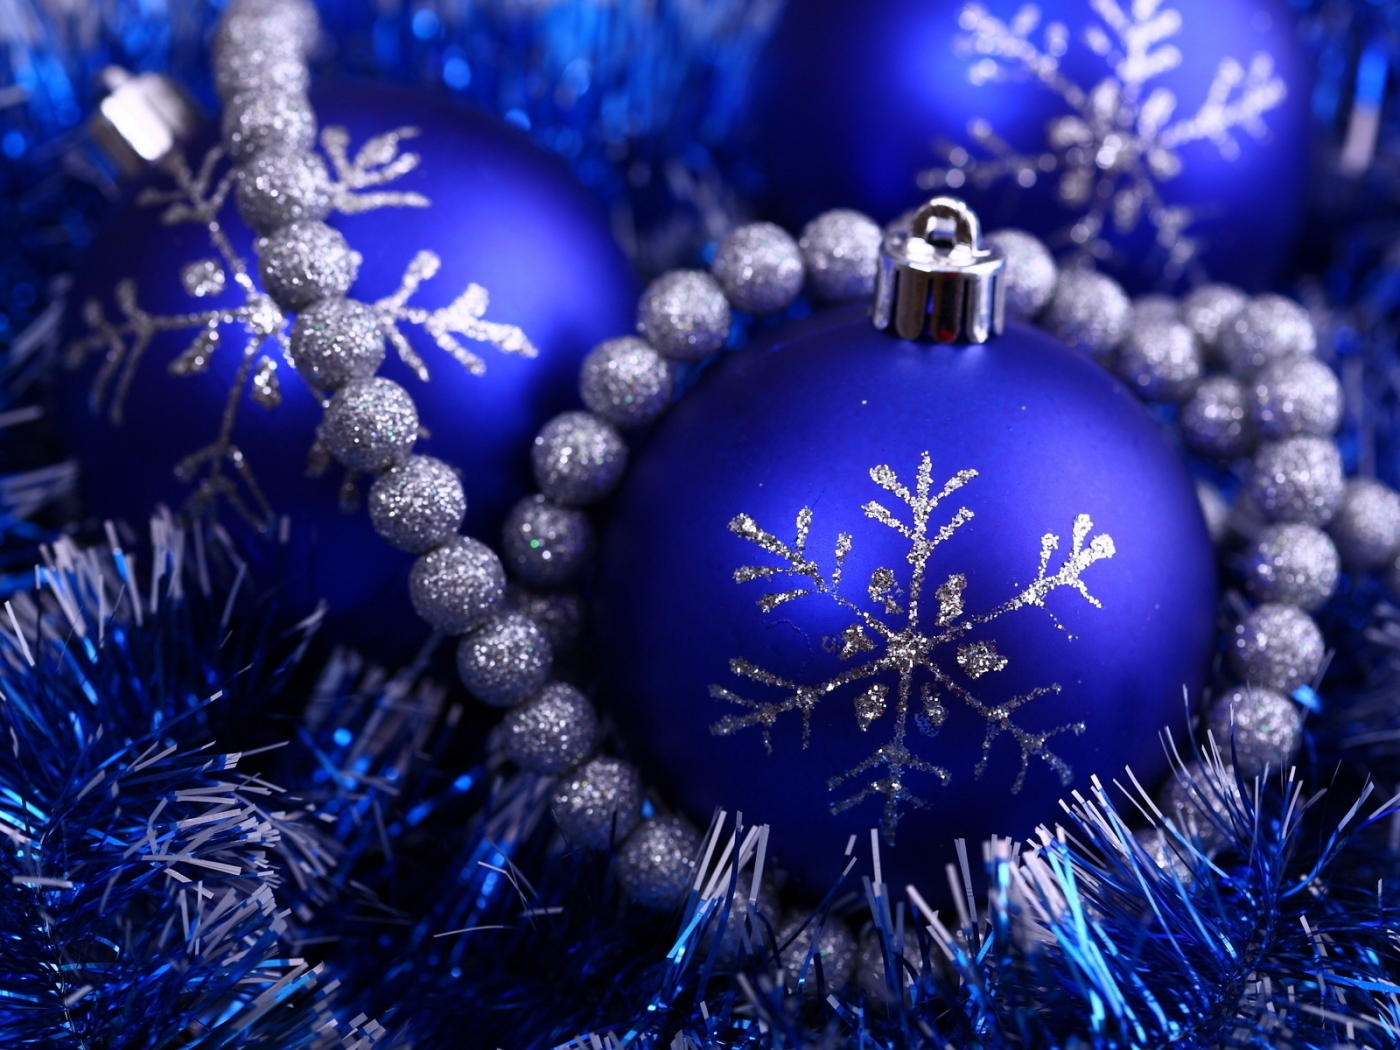 holidays, new year, blue Image for desktop